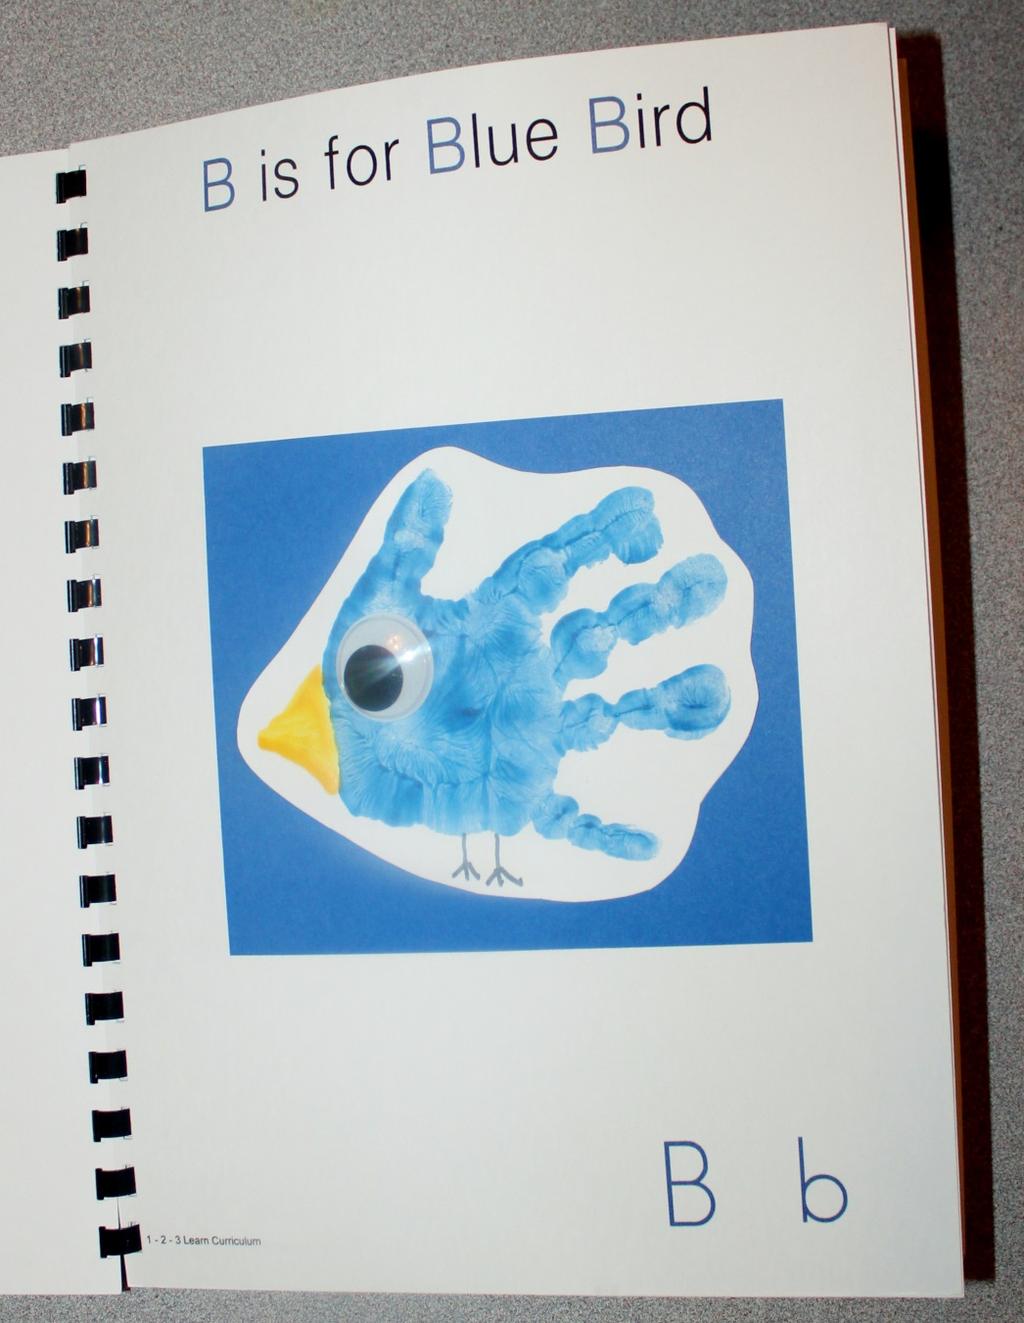 B is for Blue Bird Paint the palm of the child s hand blue and place on white card stock. When dry, paint a yellow beak and add a wiggly eye.